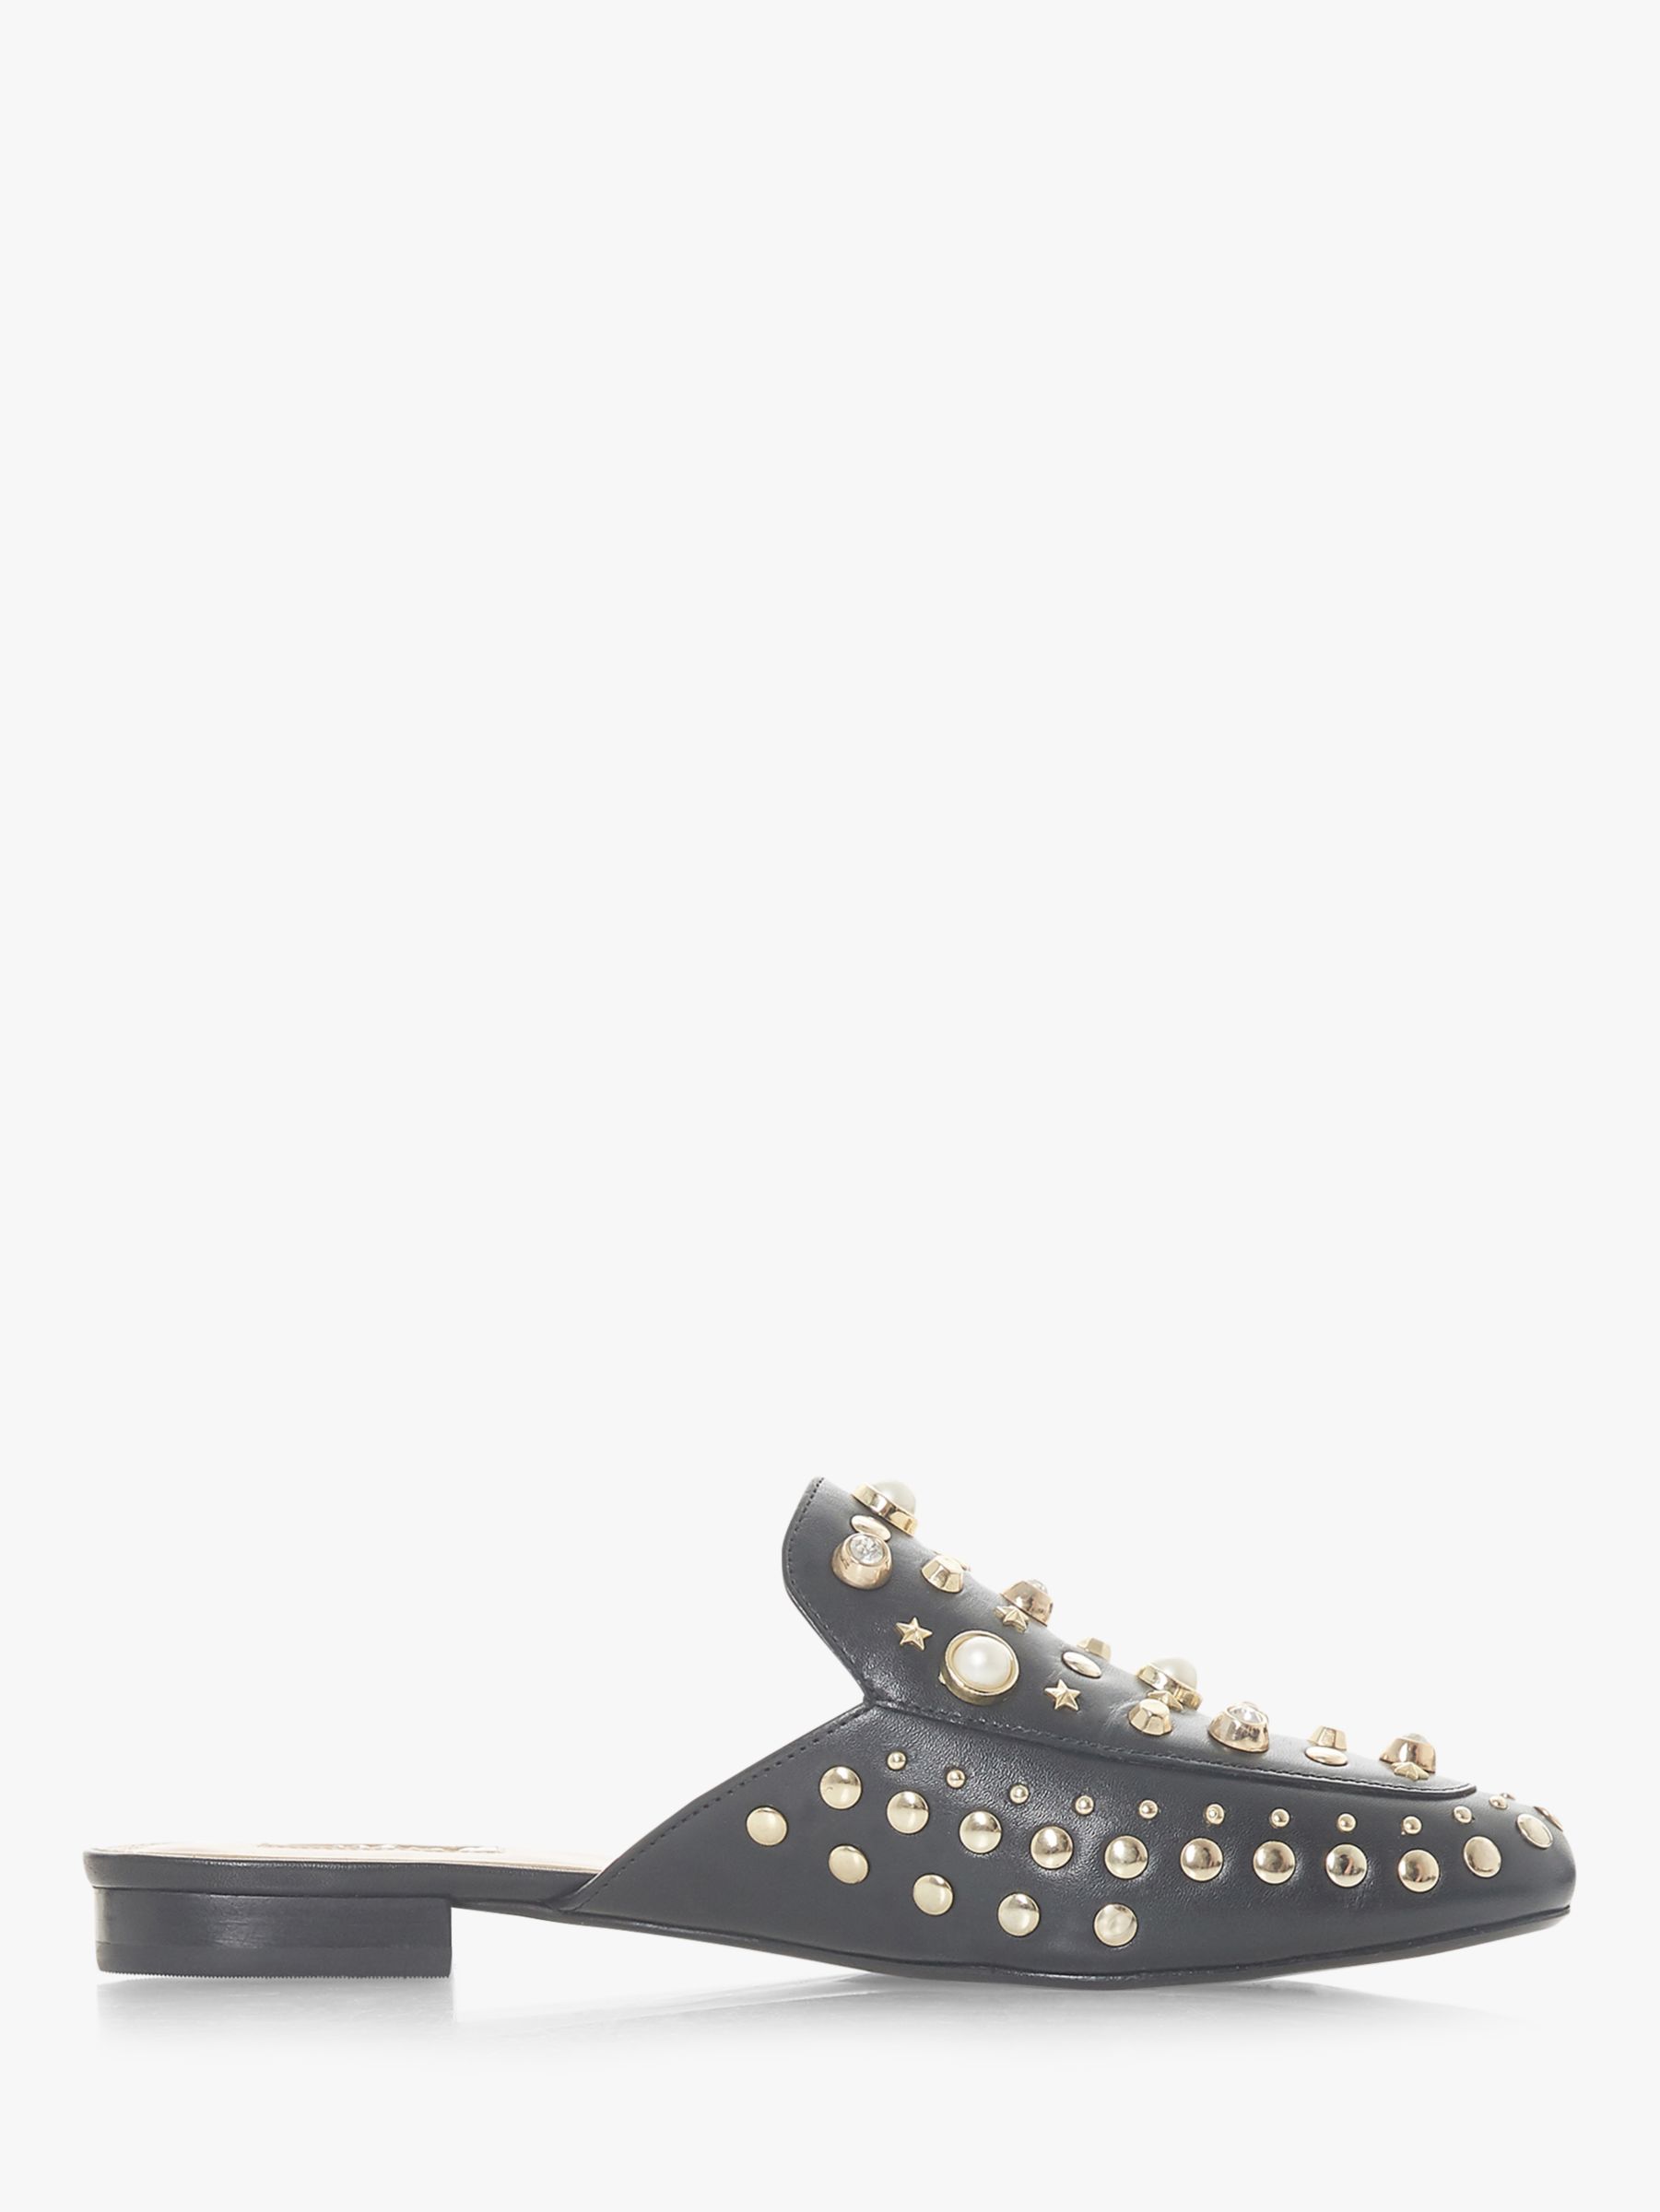 Dune Gossiping Slip On Mule Loafers, Black Leather